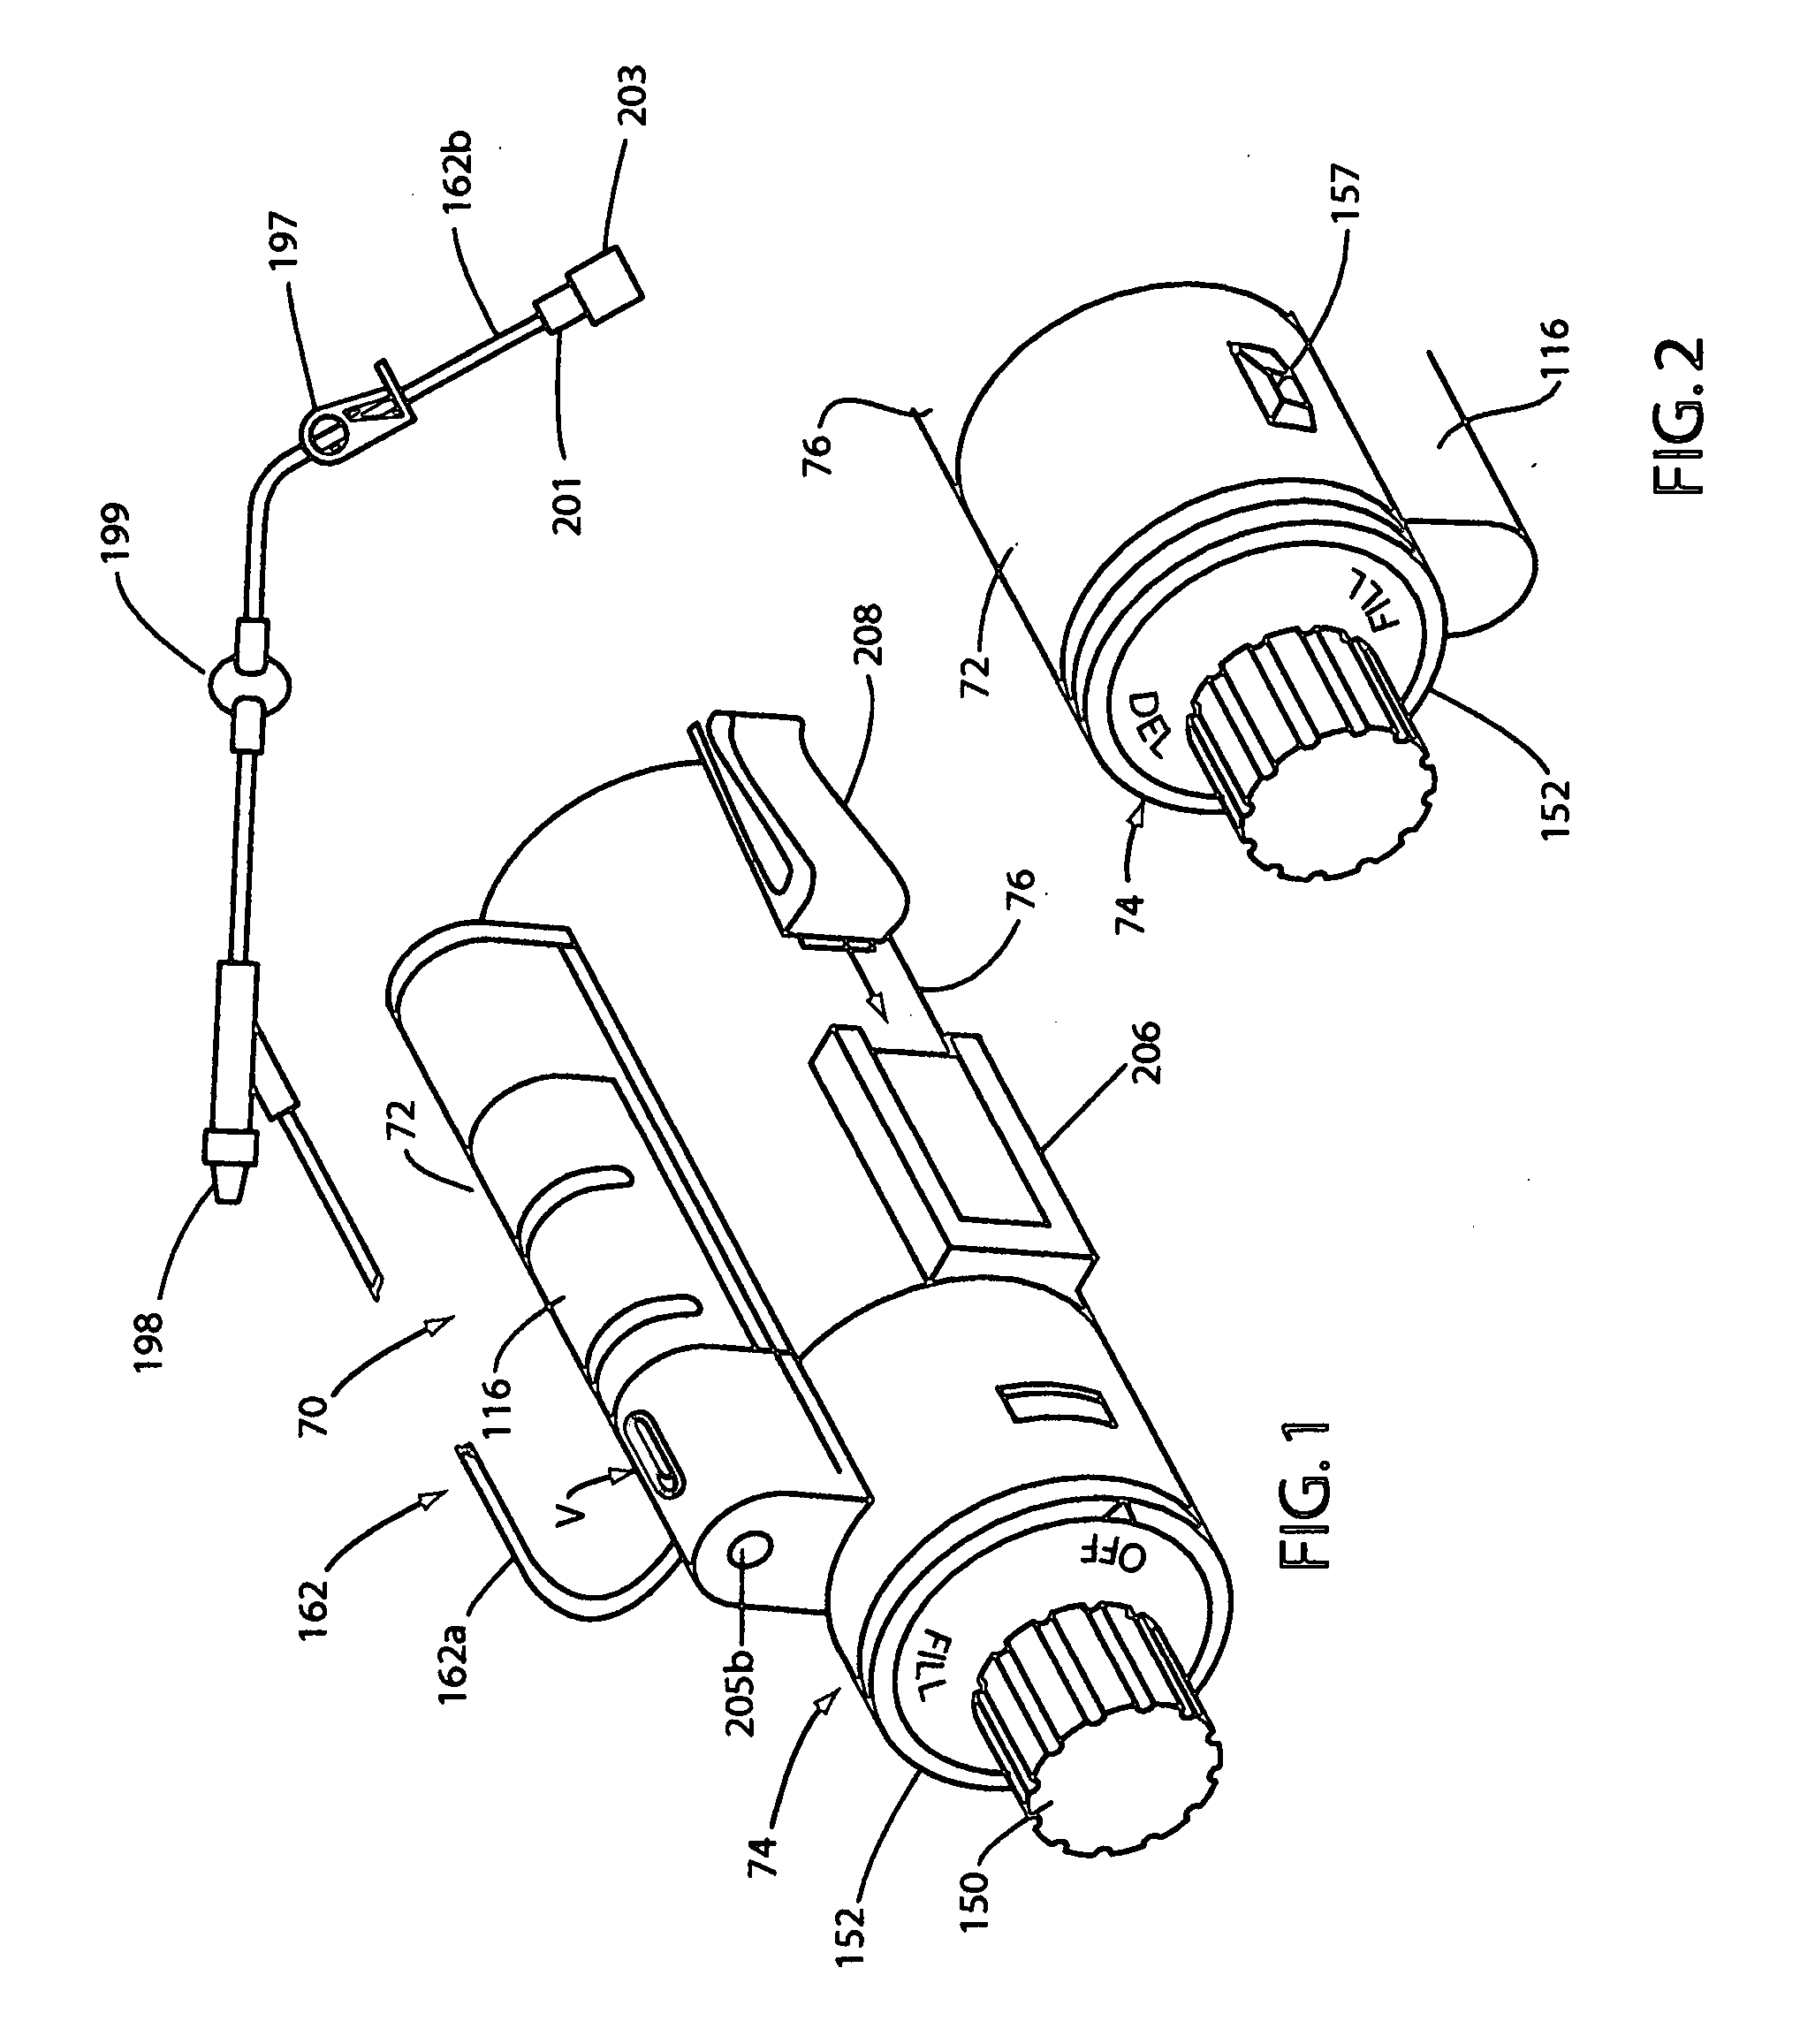 Fluid dispenser with additive sub-system